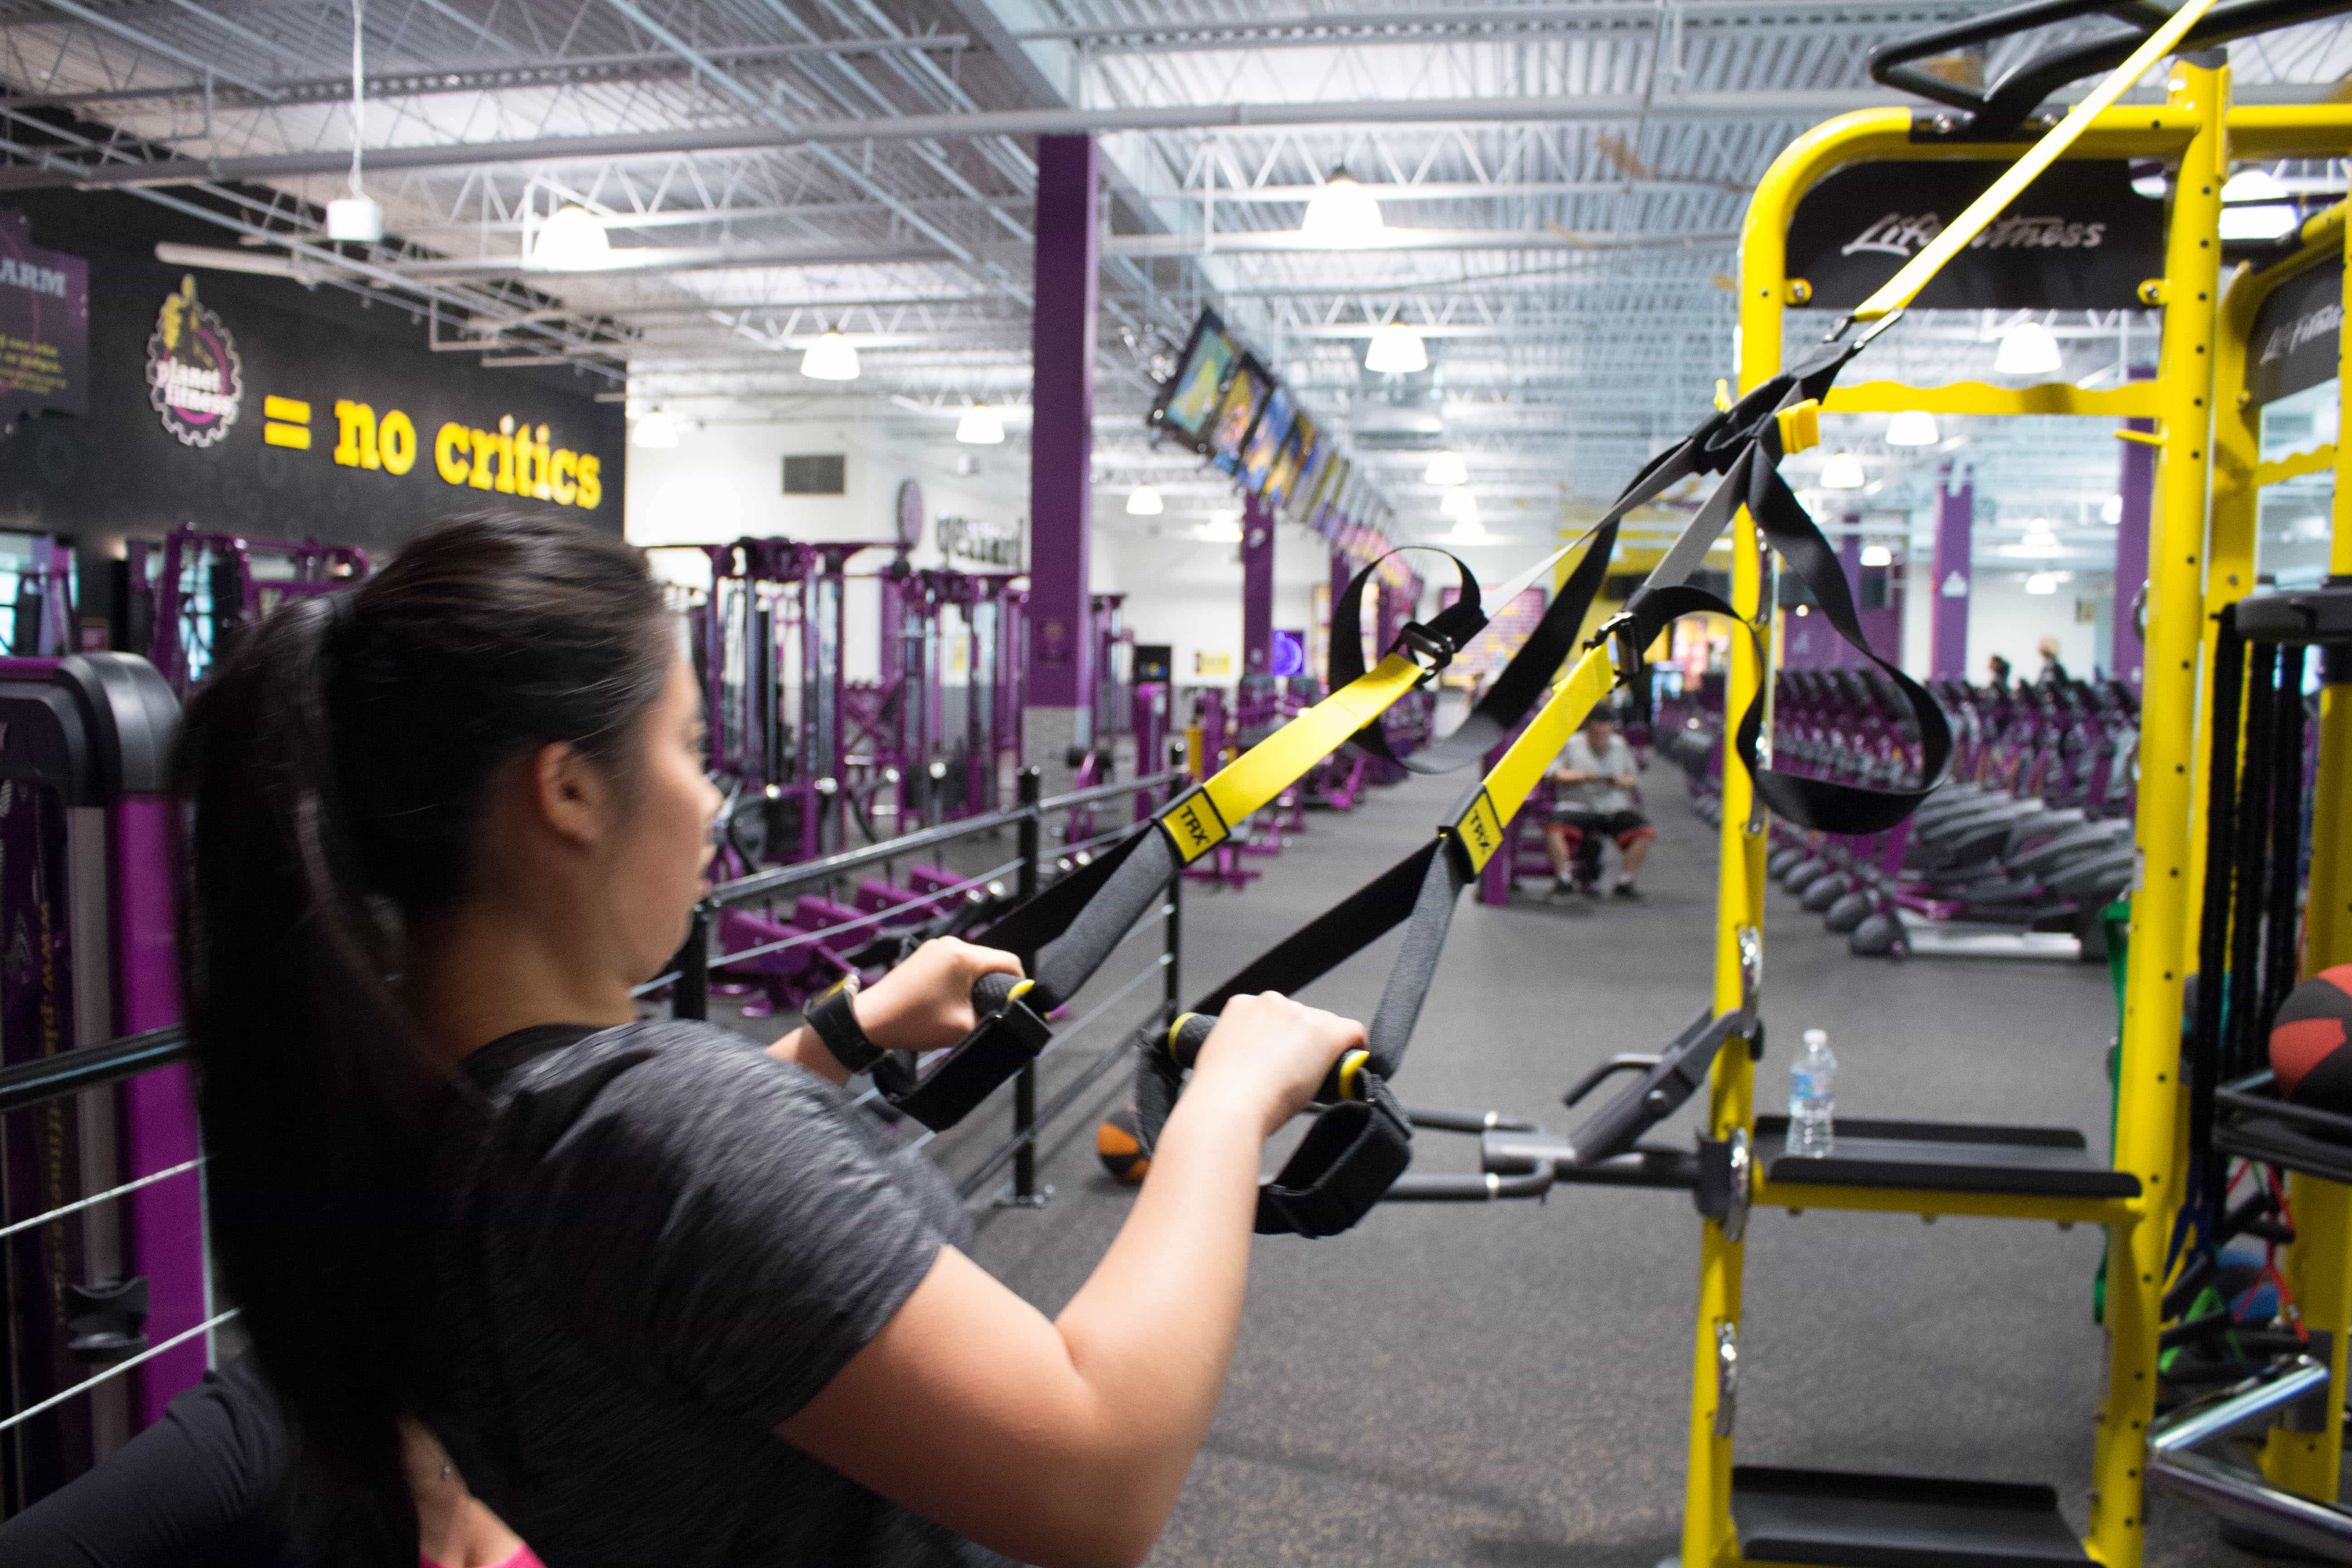 Are you looking for a no frills gym with low rates in Toronto? Check out the new Planet Fitness location at Gerrard Square!